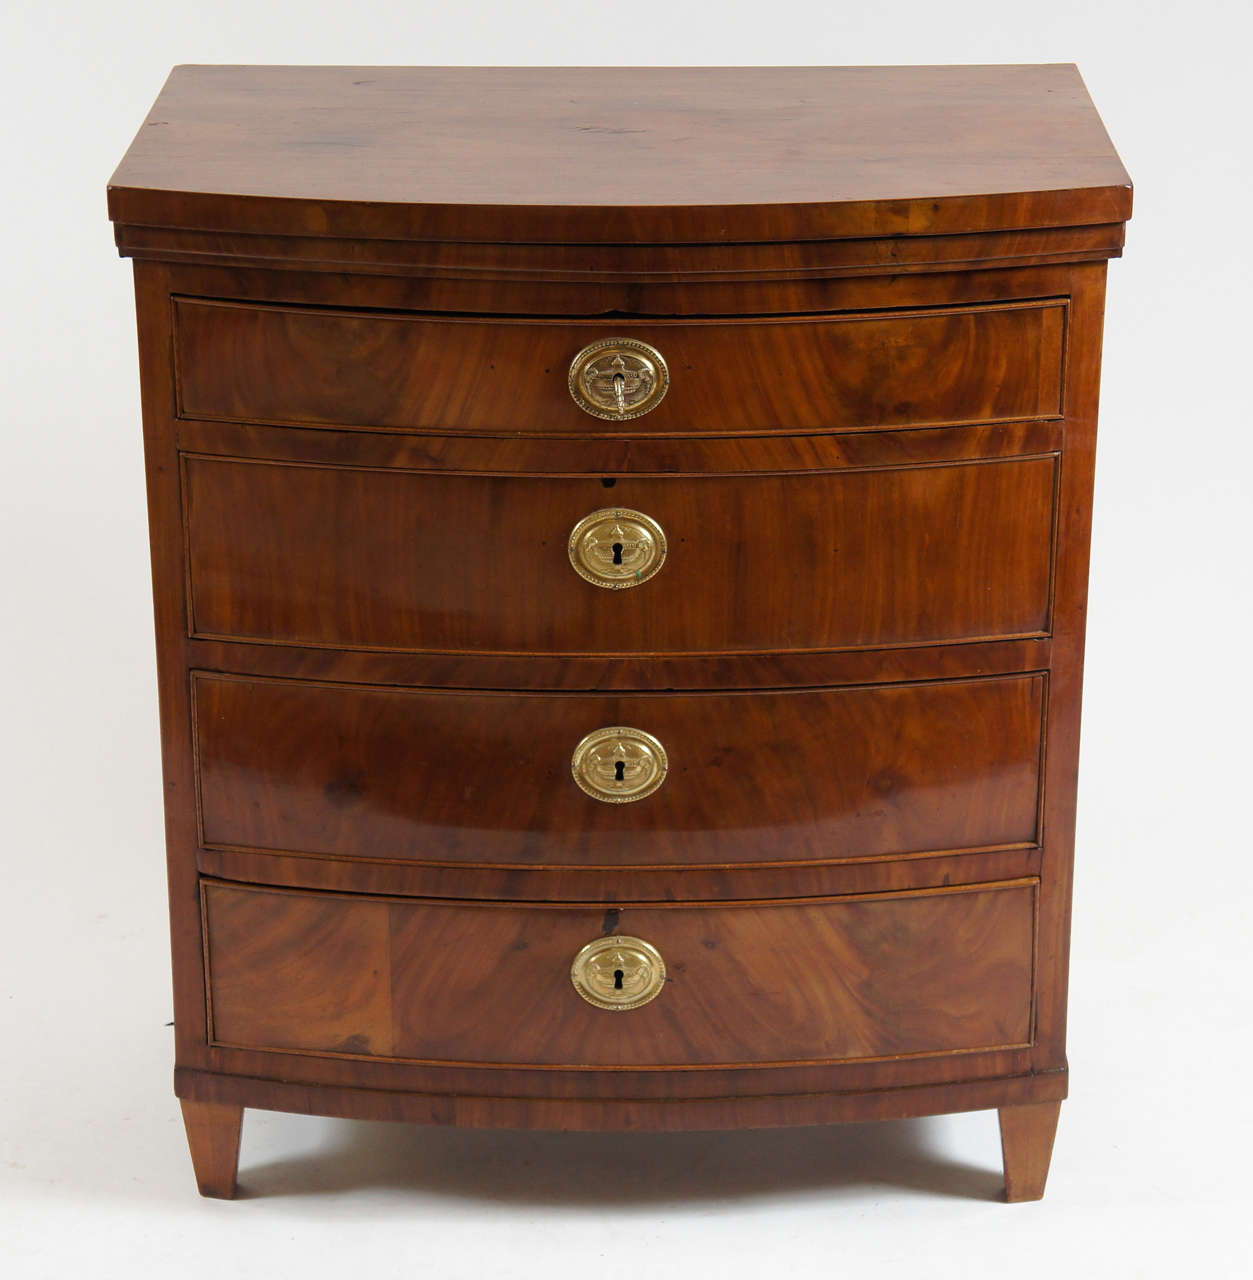 Wonderful circa 1800 Danish mahogany commode of bow-front form having four graduated drawers with exquisite original large scale gilt bronze neoclassical motif key-hole escutcheons and original working key.